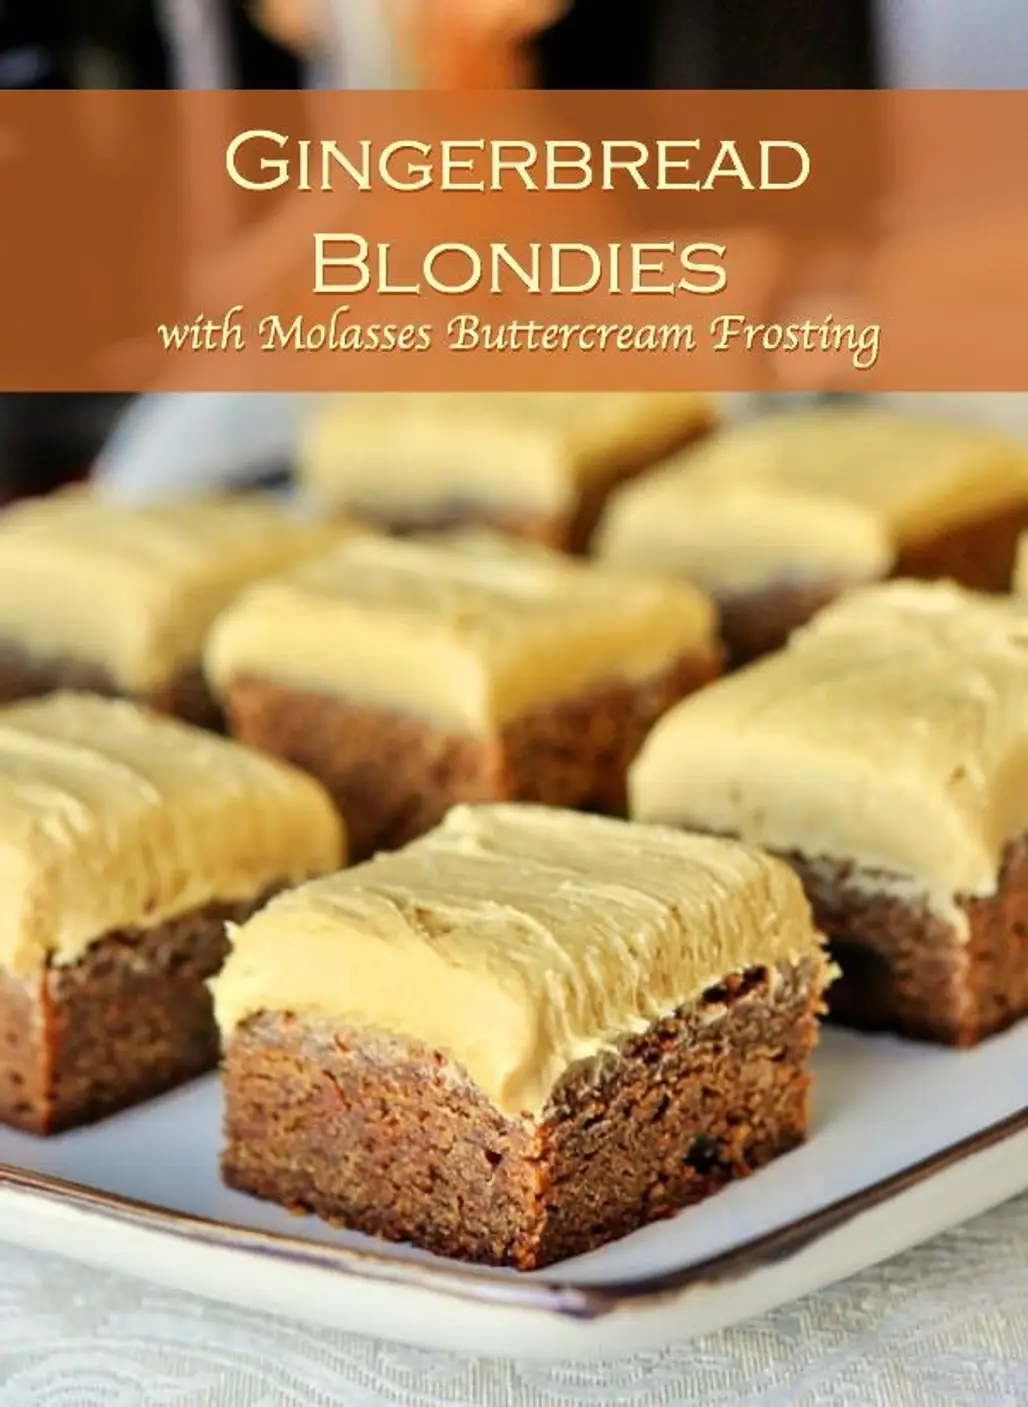 Gingerbread Blondies with Molasses Buttercream Frosting